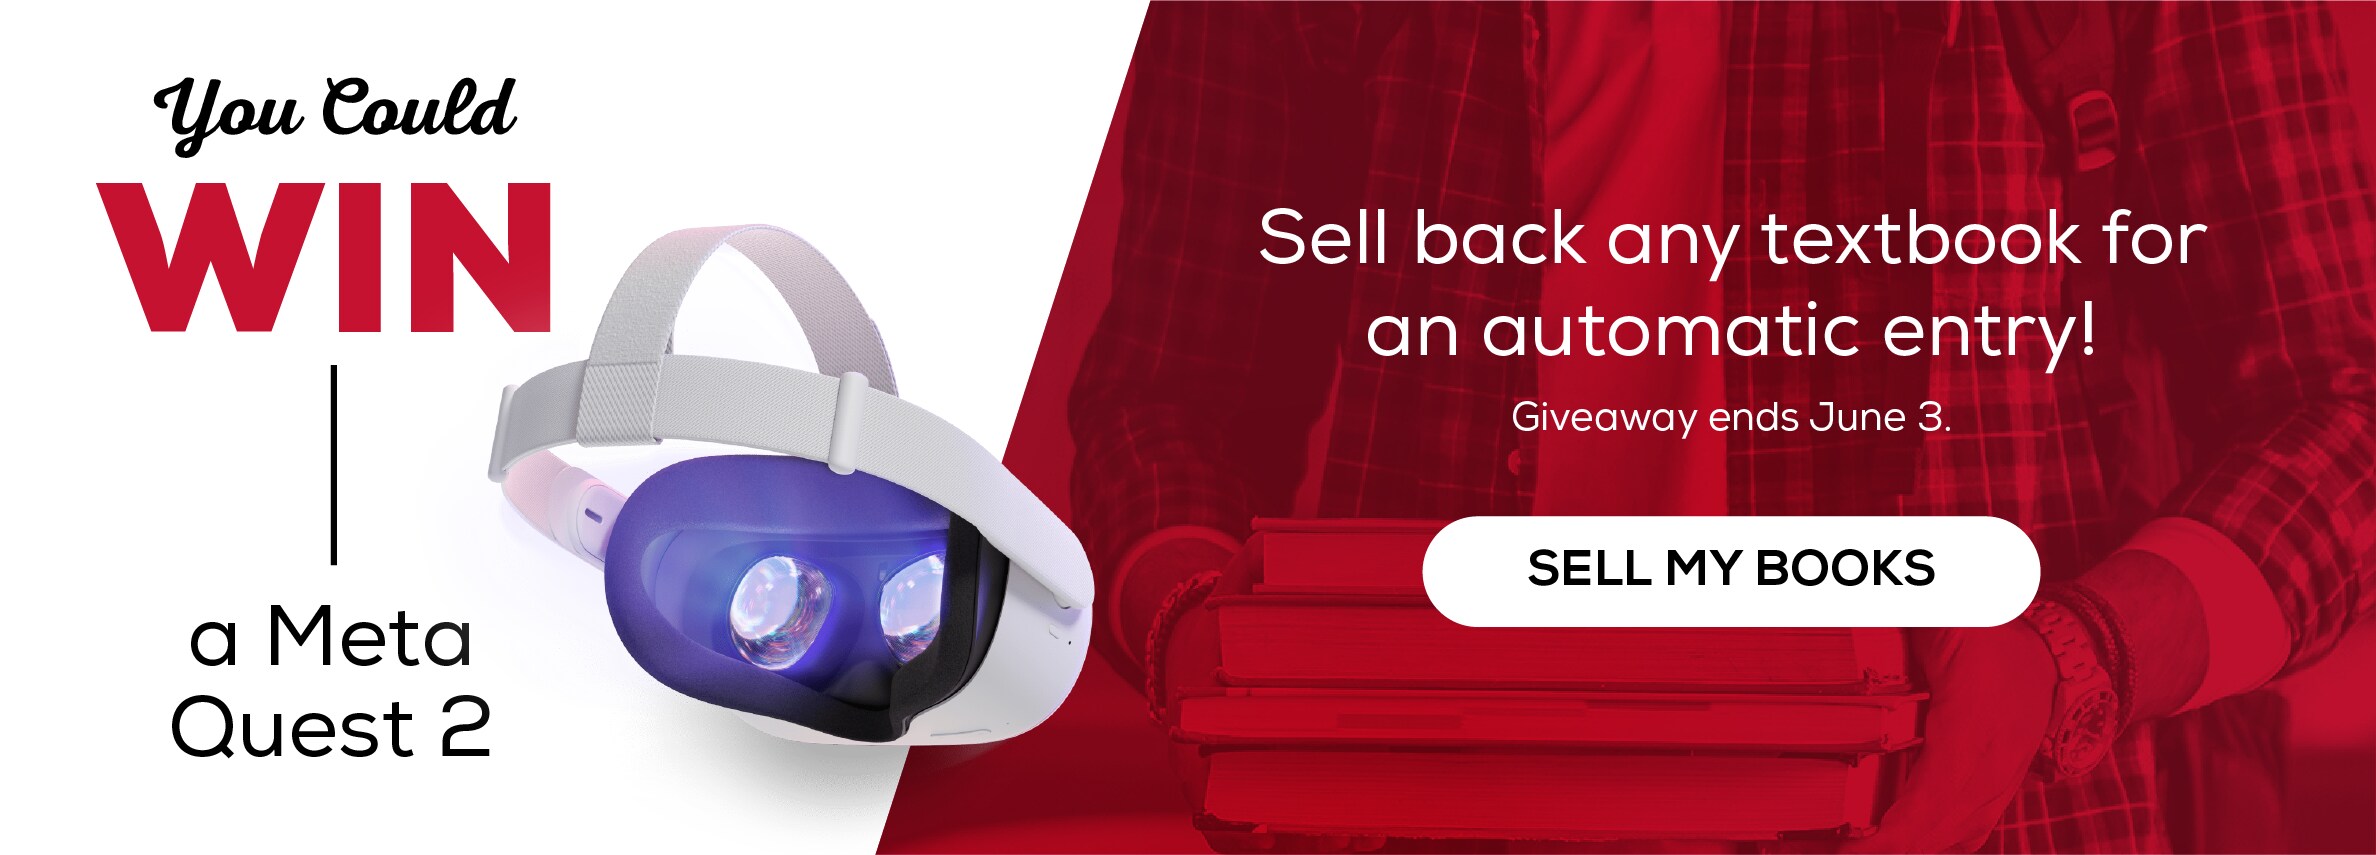 You could win a Meta Quest 2. Sell back any textbook for an automatic entry! Giveaway ends June 3. Click to sell your books.